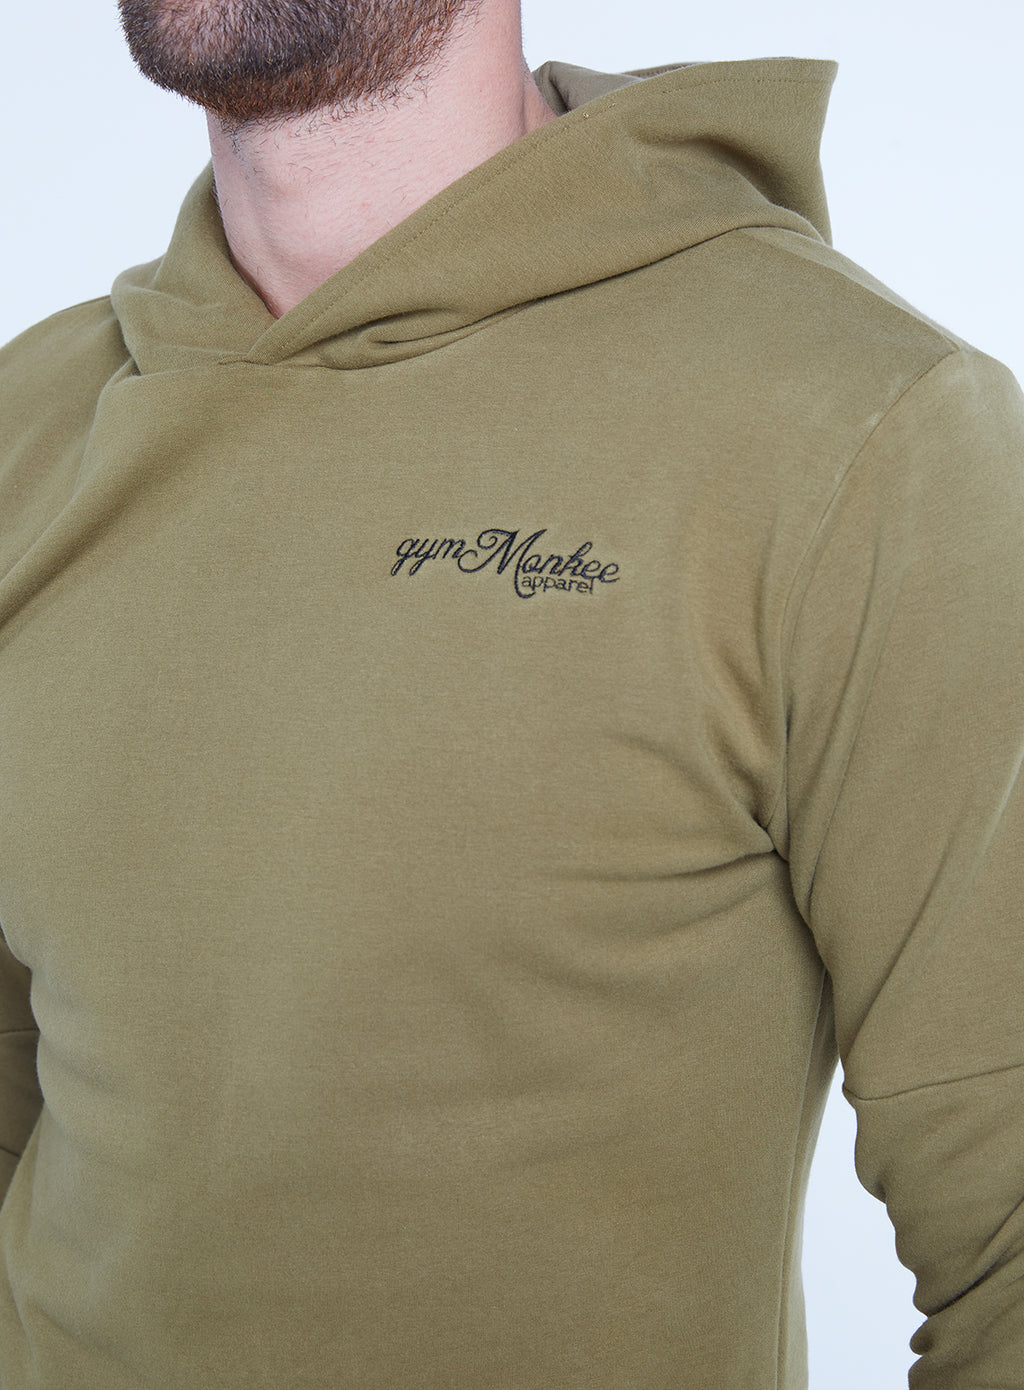 Gym Monkee - Khaki Hoodie FRONT CHEST